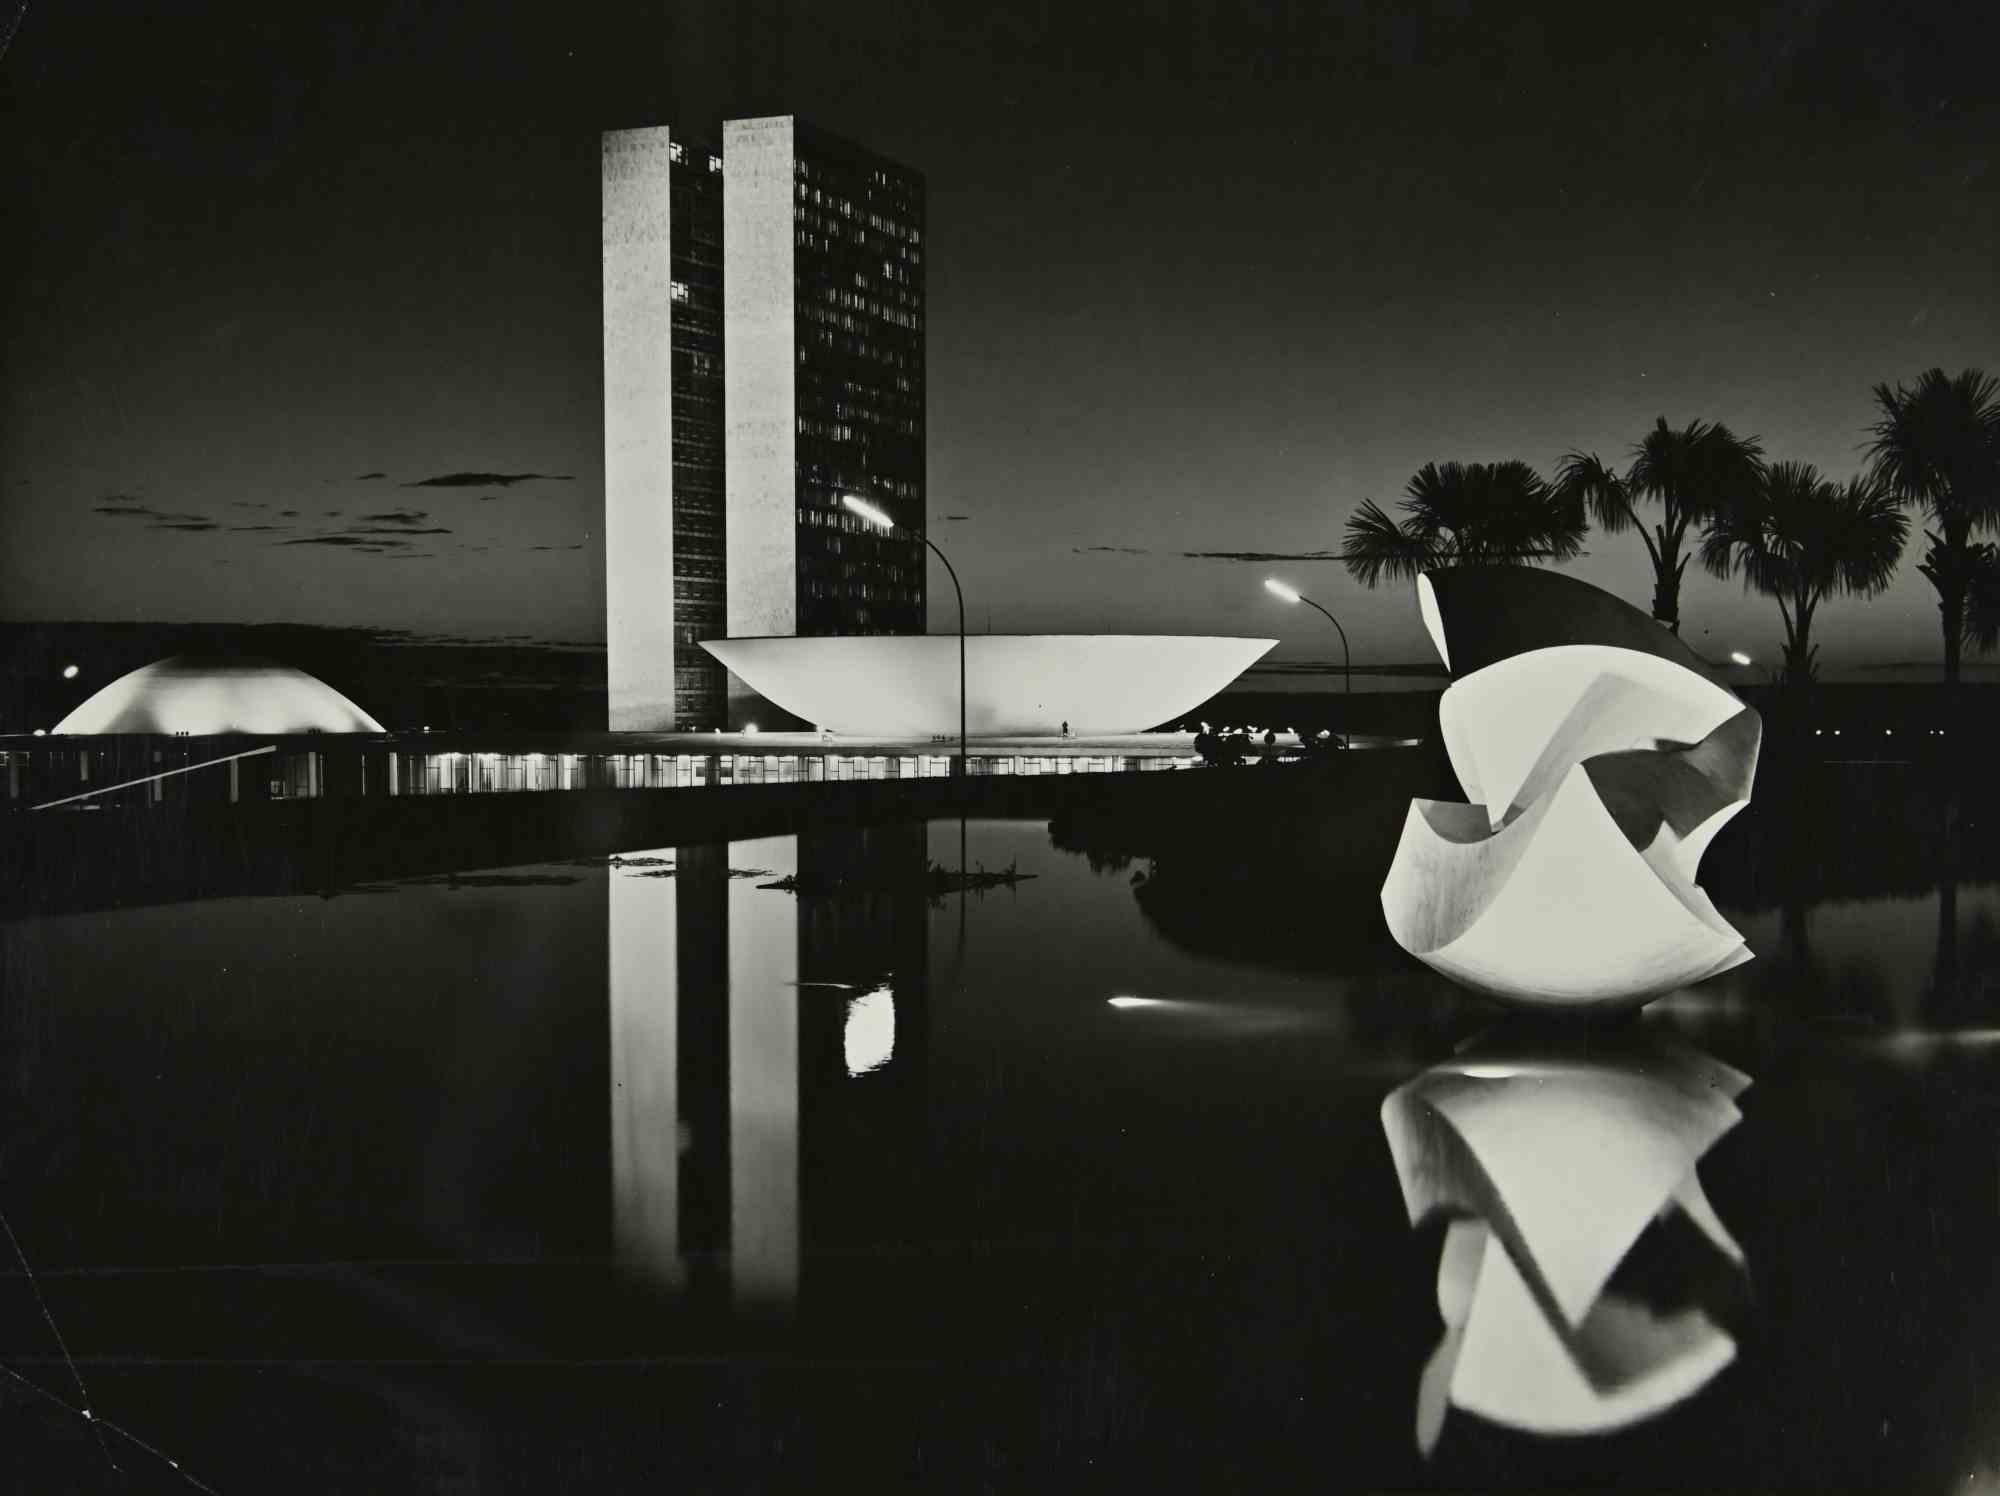 Unknown Figurative Photograph - Poderes Brasilia at Night - Photograph - 1960s